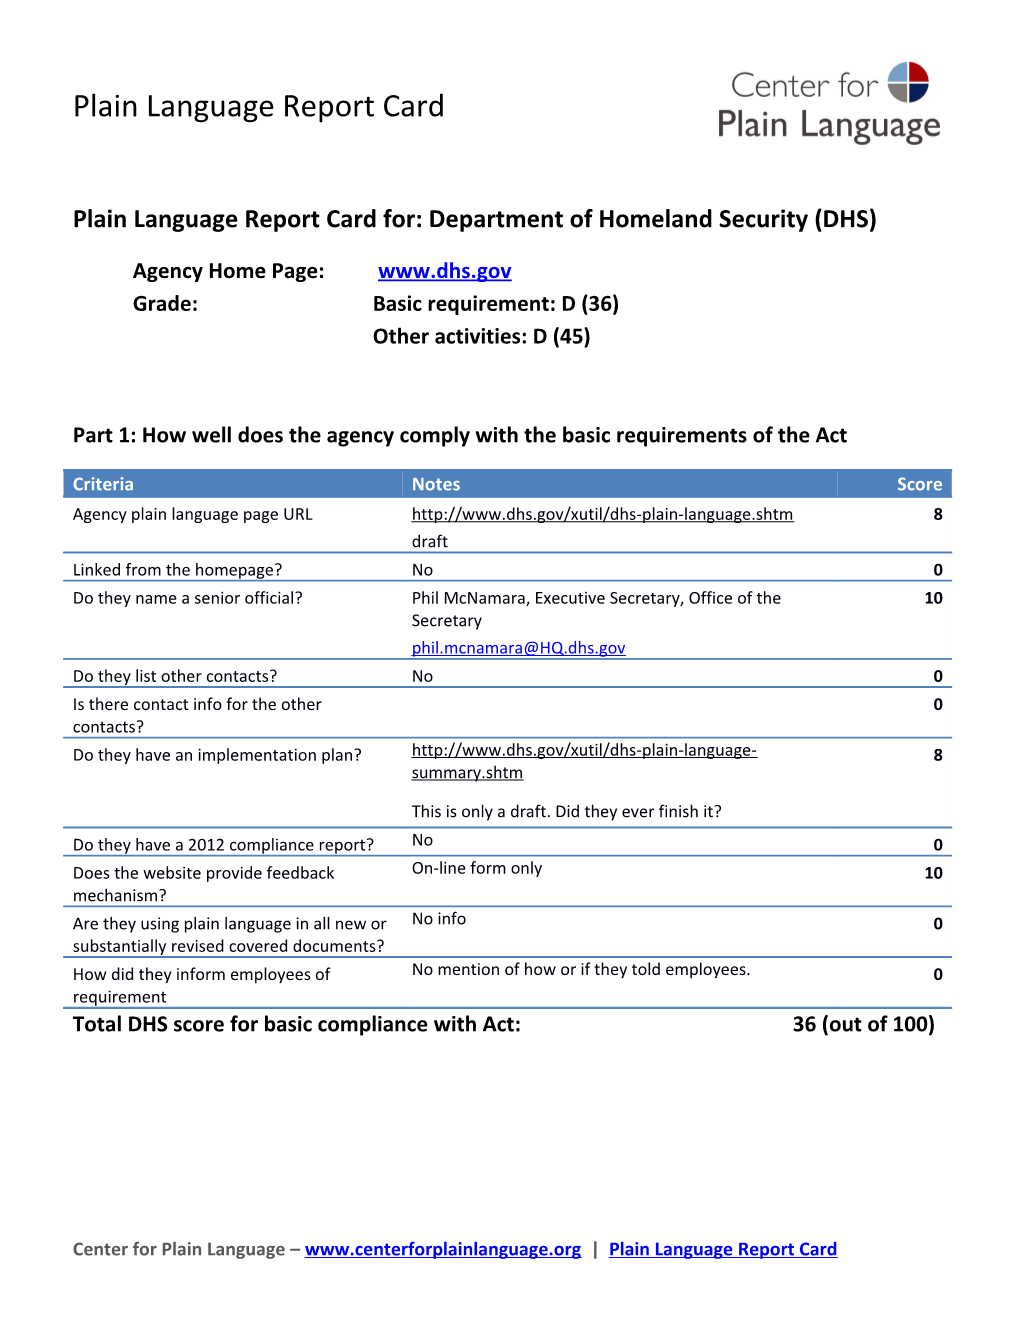 Plain Language Report Card For: Department of Homeland Security (DHS)